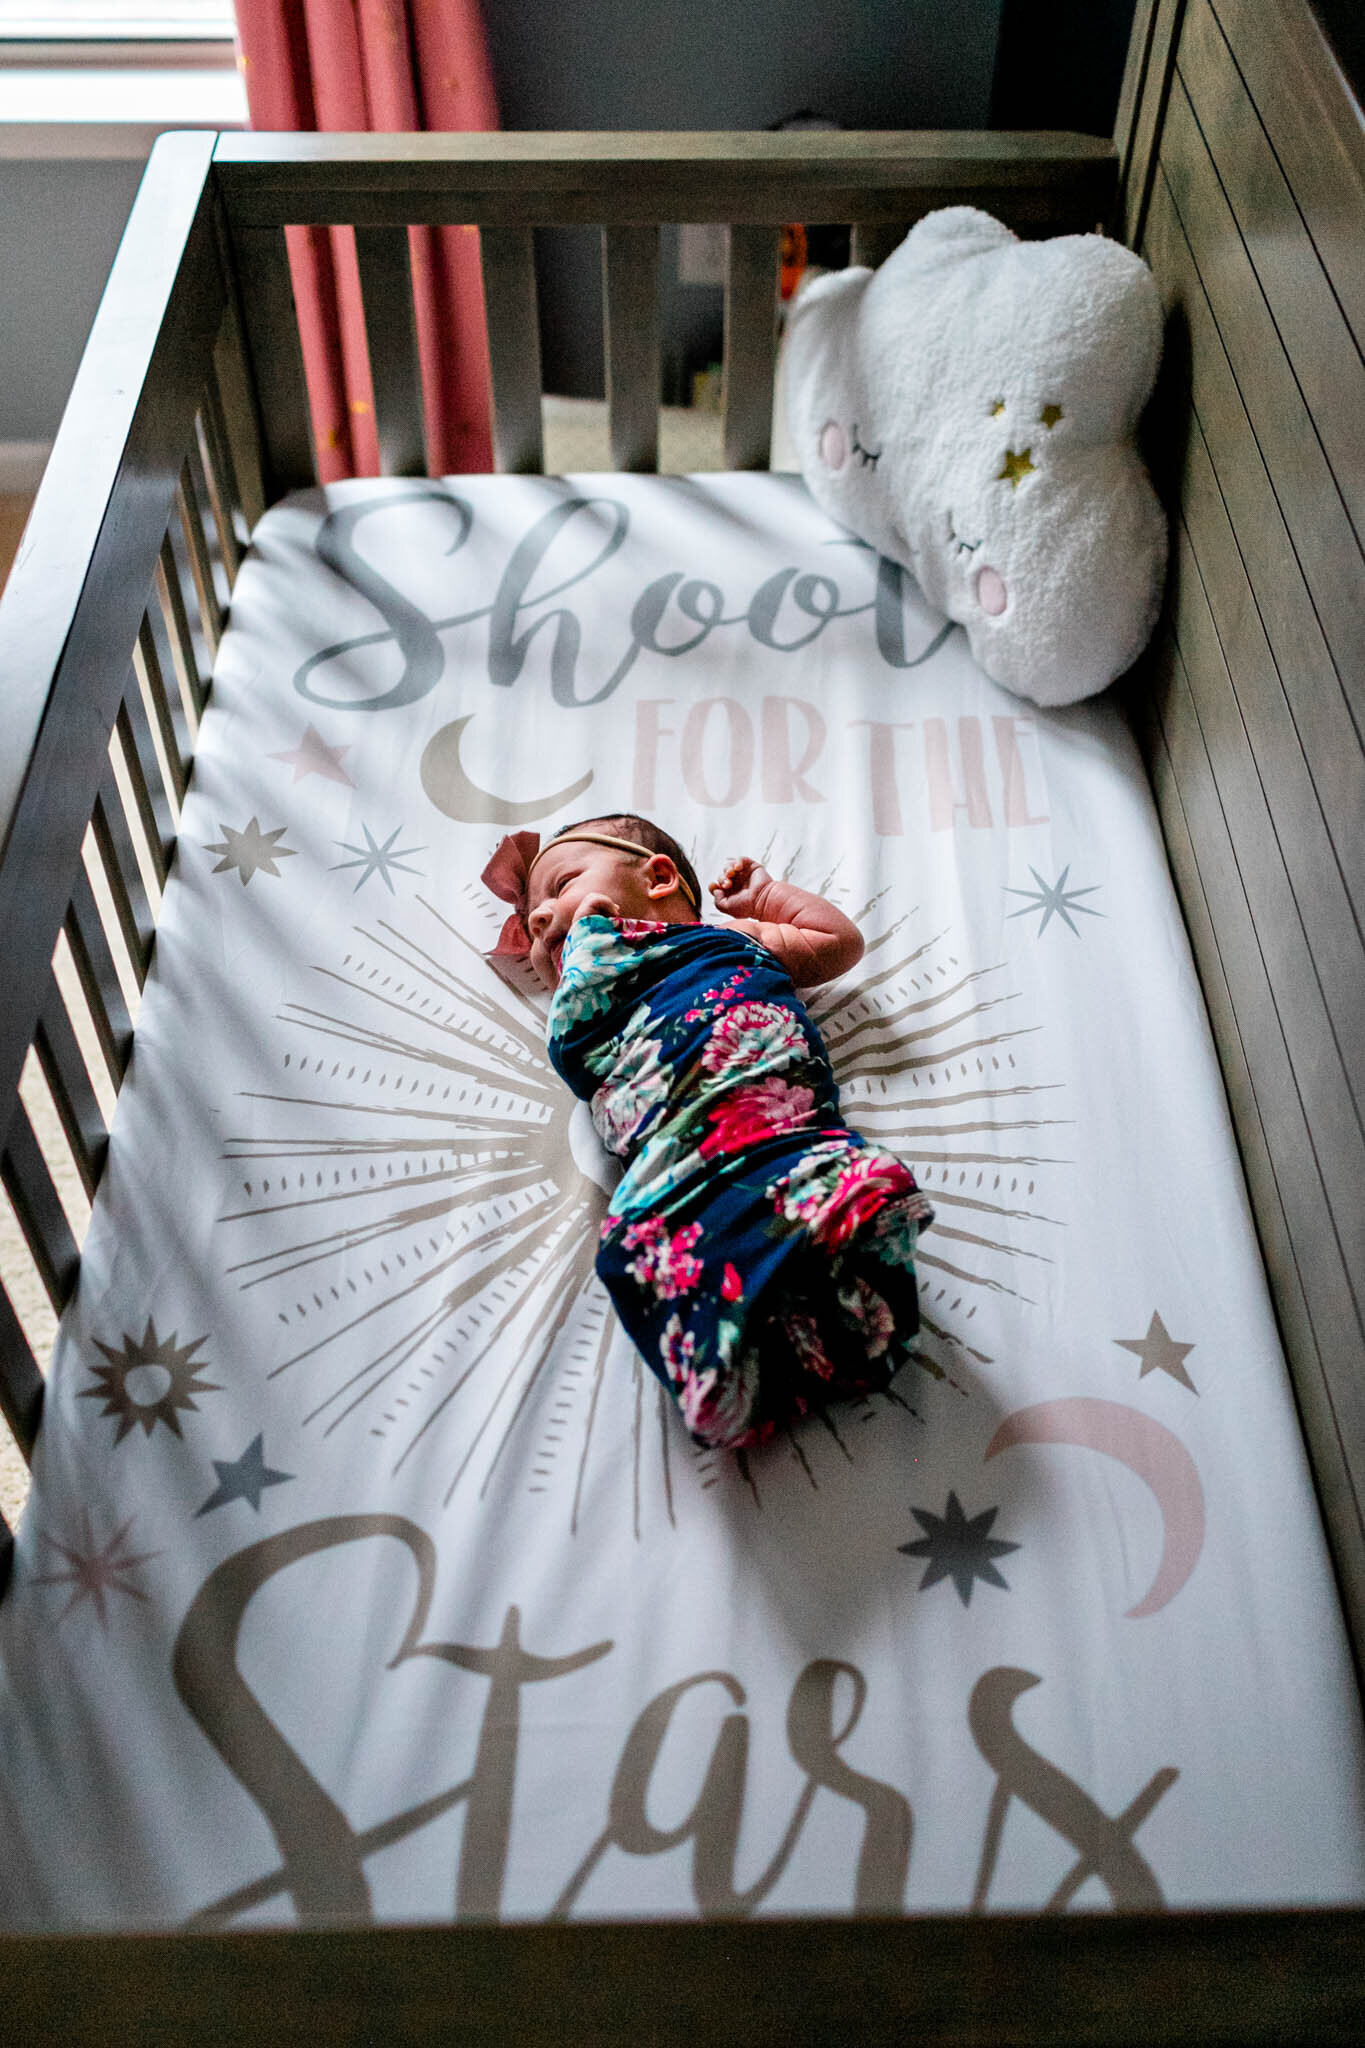 Durham Newborn Photographer | By G. Lin Photography | Baby in crib that says shoot for the stars